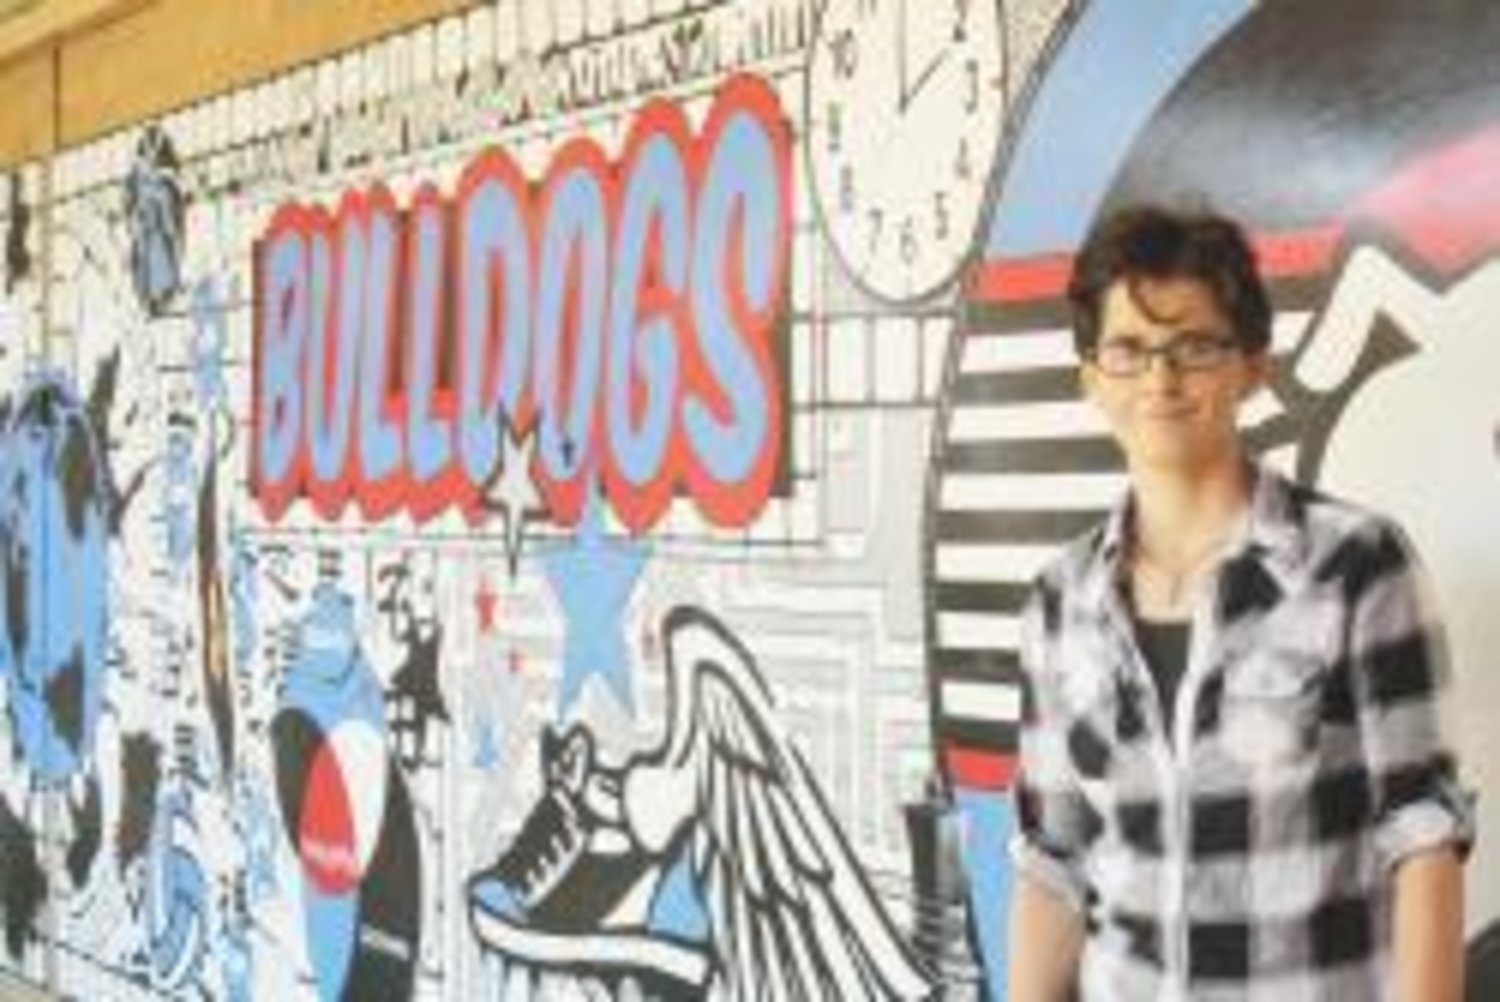 Local artist Erica Fry stands with the mural she created for the atrium of the Quitman Junior High School.